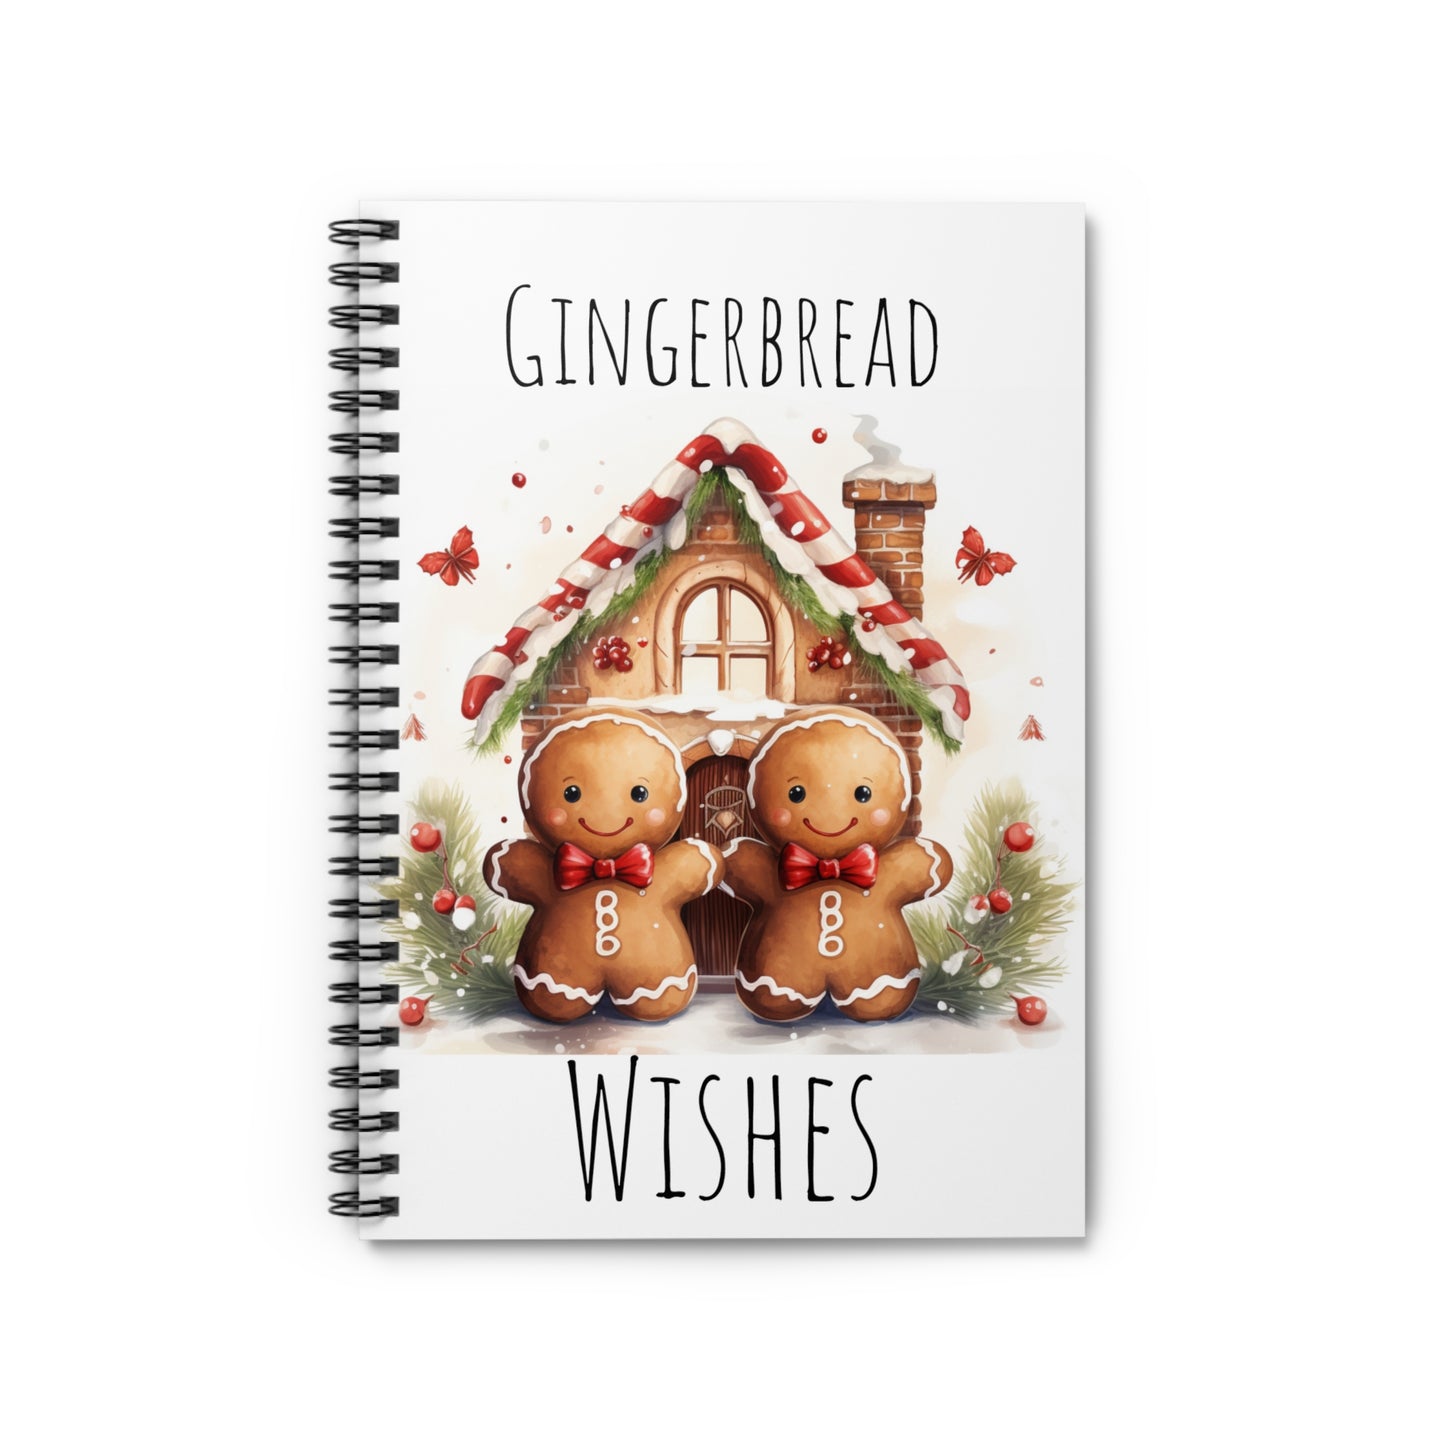 Gingerbread Wishes Spiral Notebook - Ruled Line